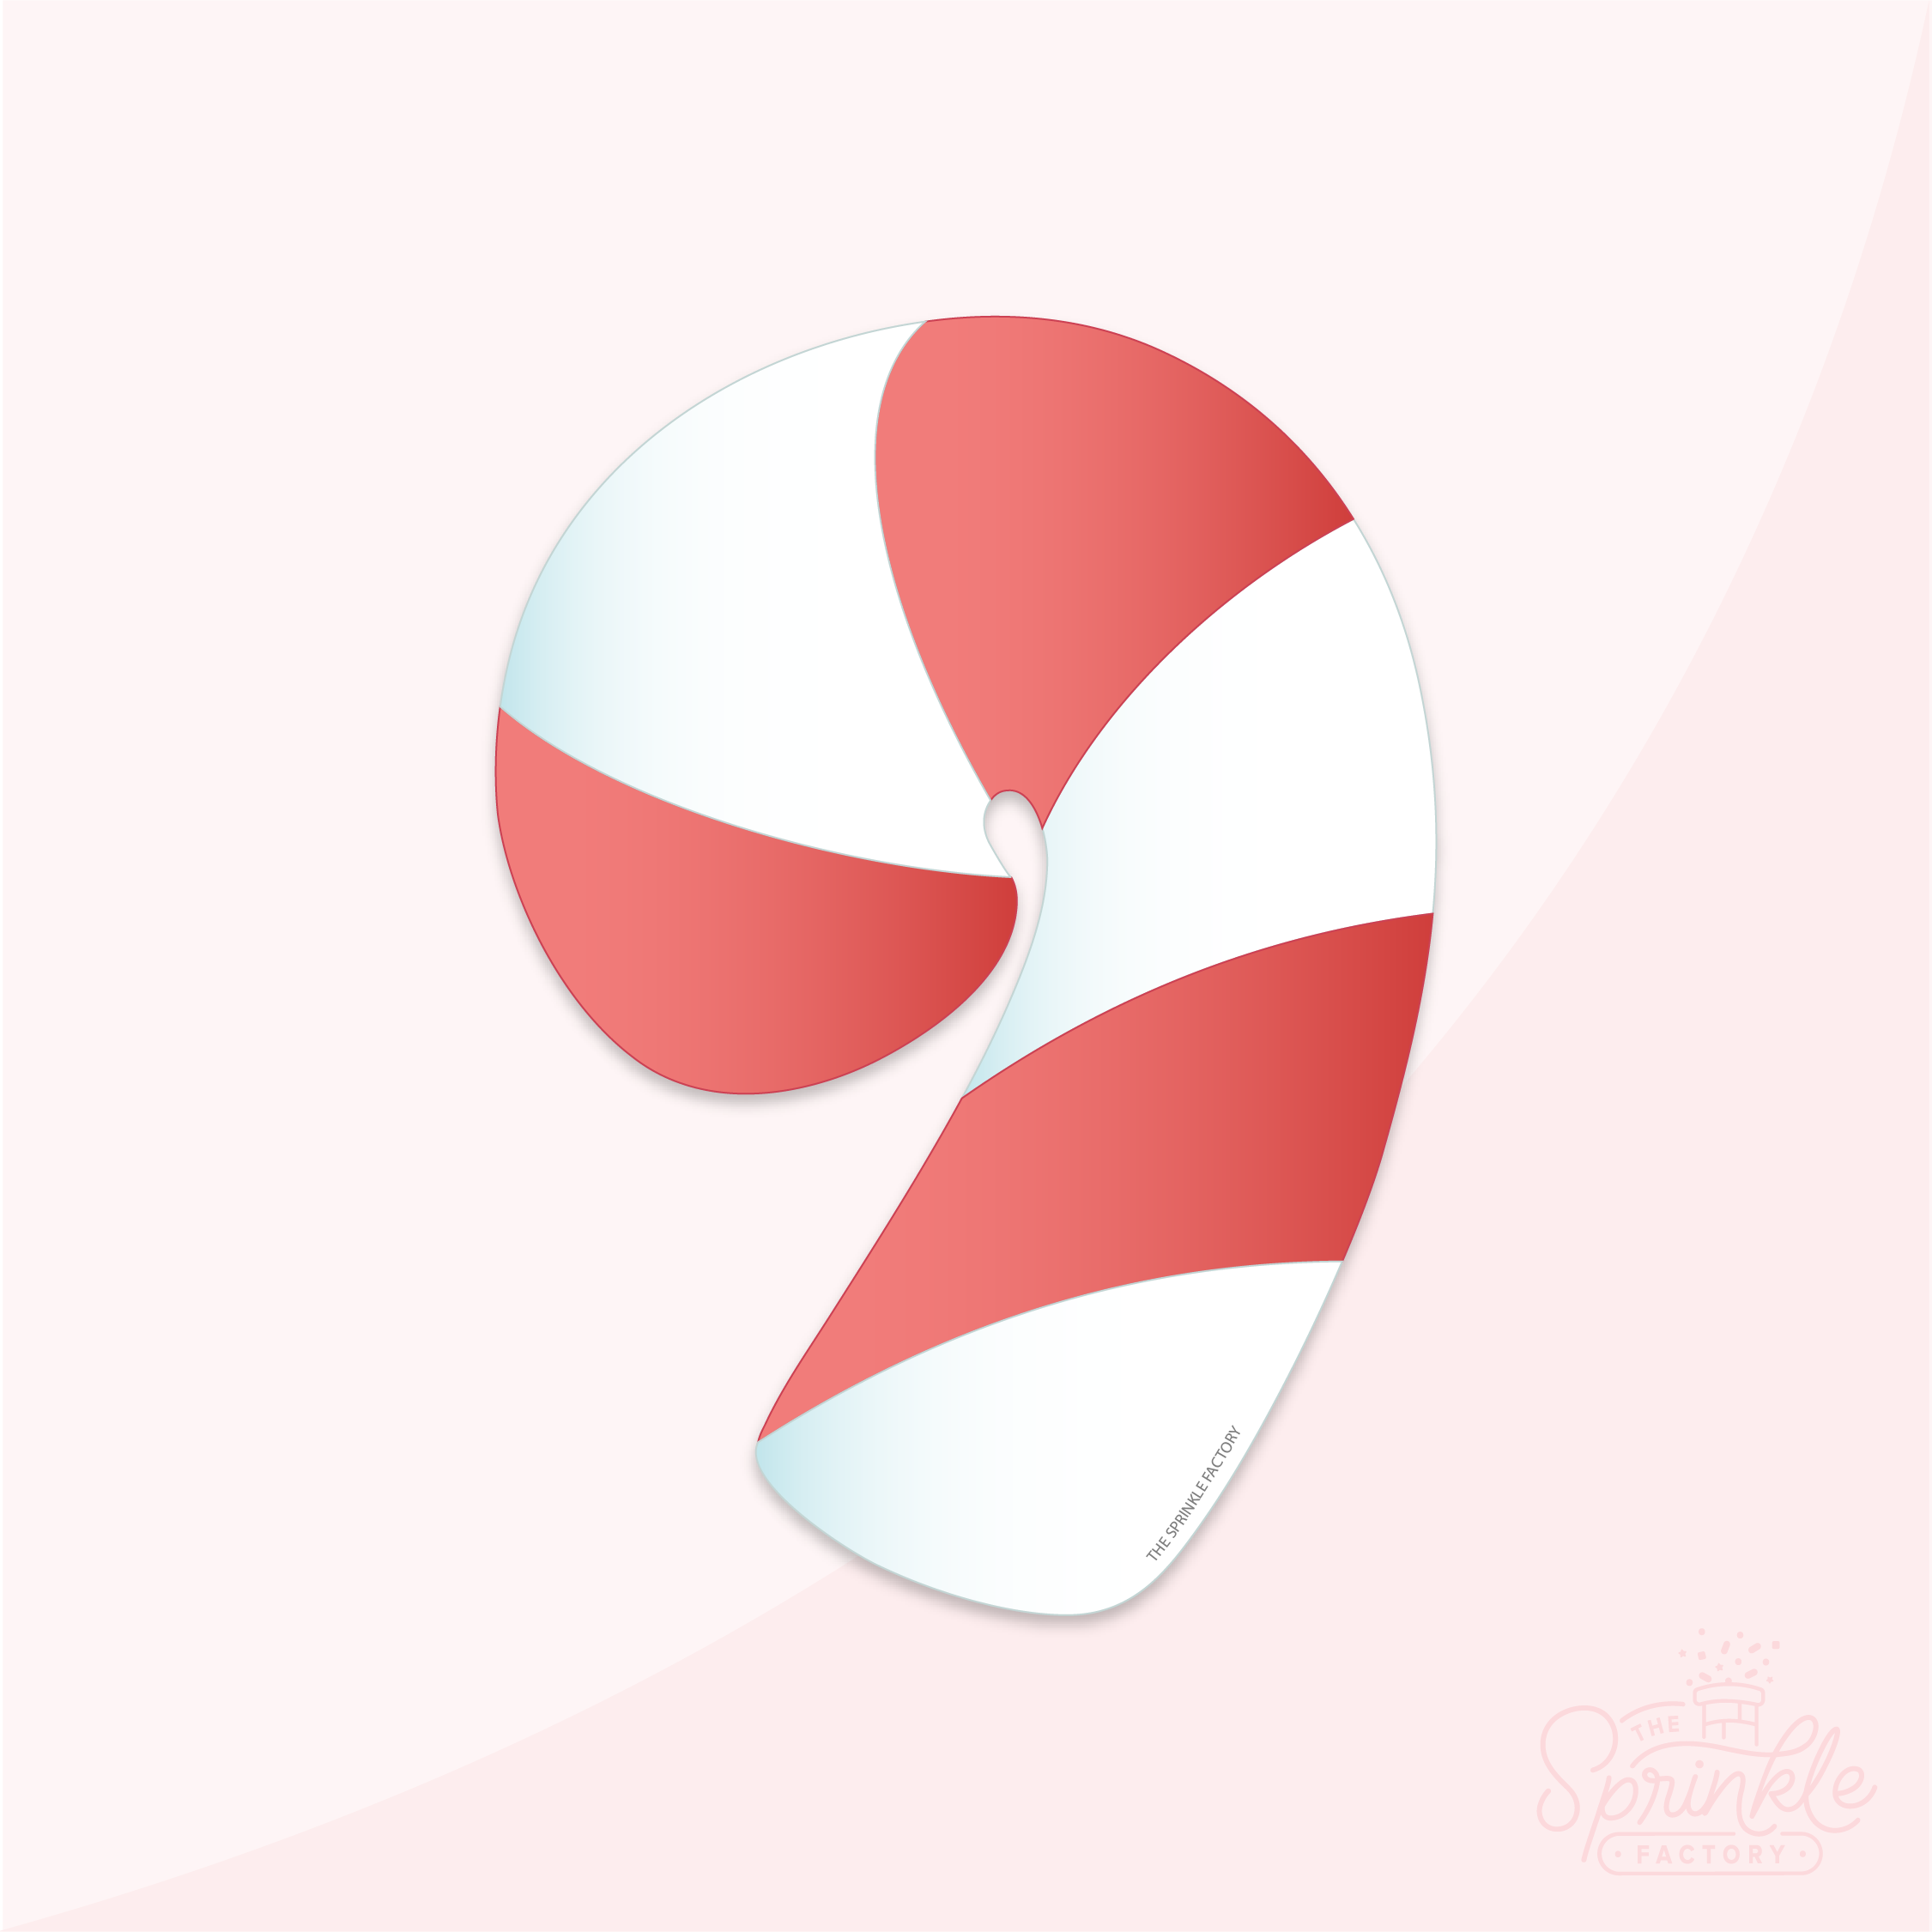 Clipart of a curved red and white thick stripped candy cane facing left.